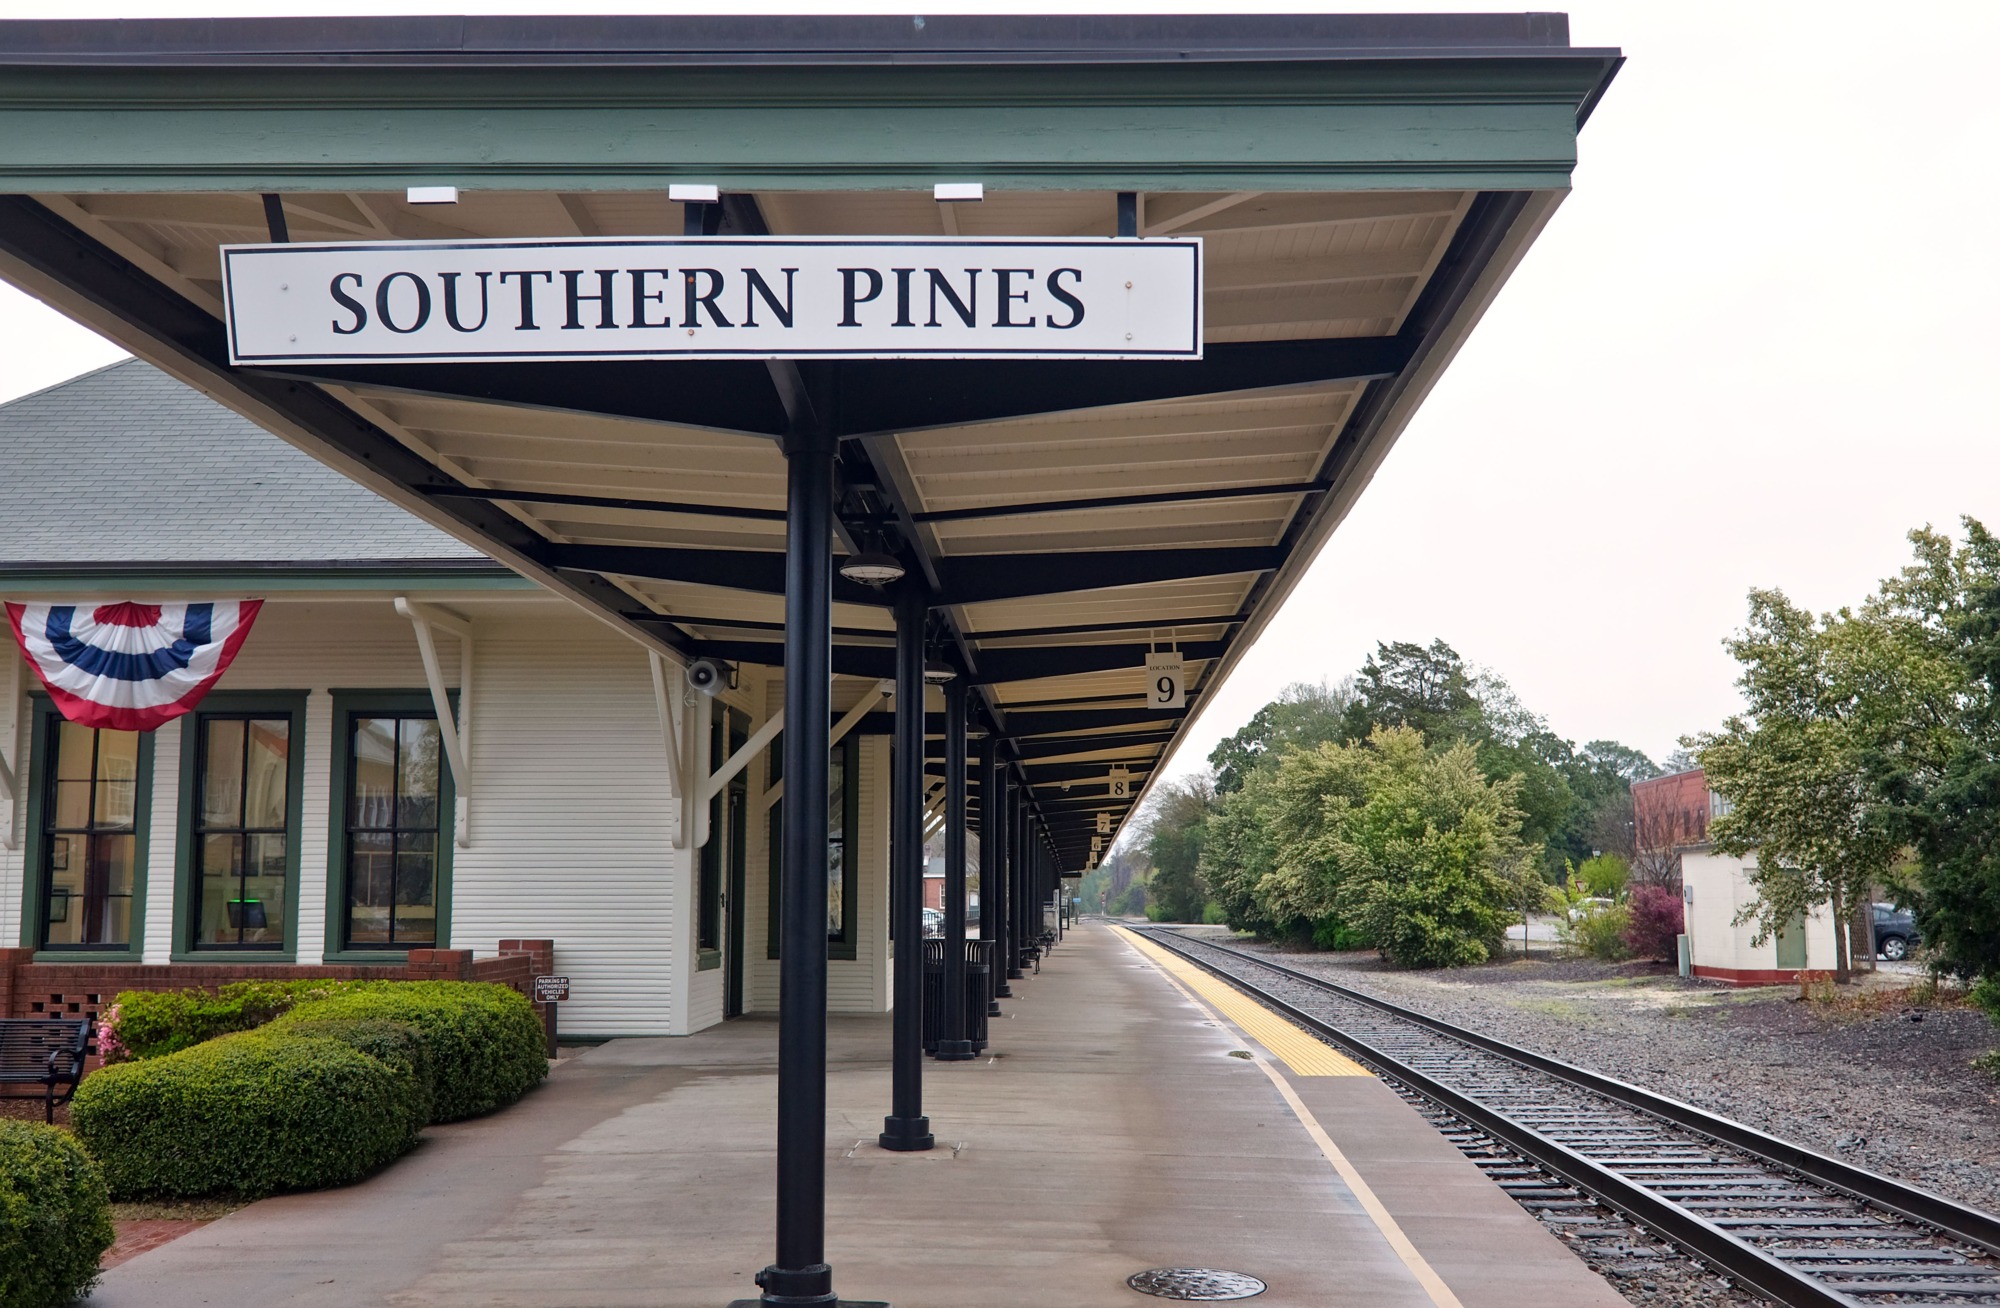 View of the platform at the Southern Pines Amtrak Station